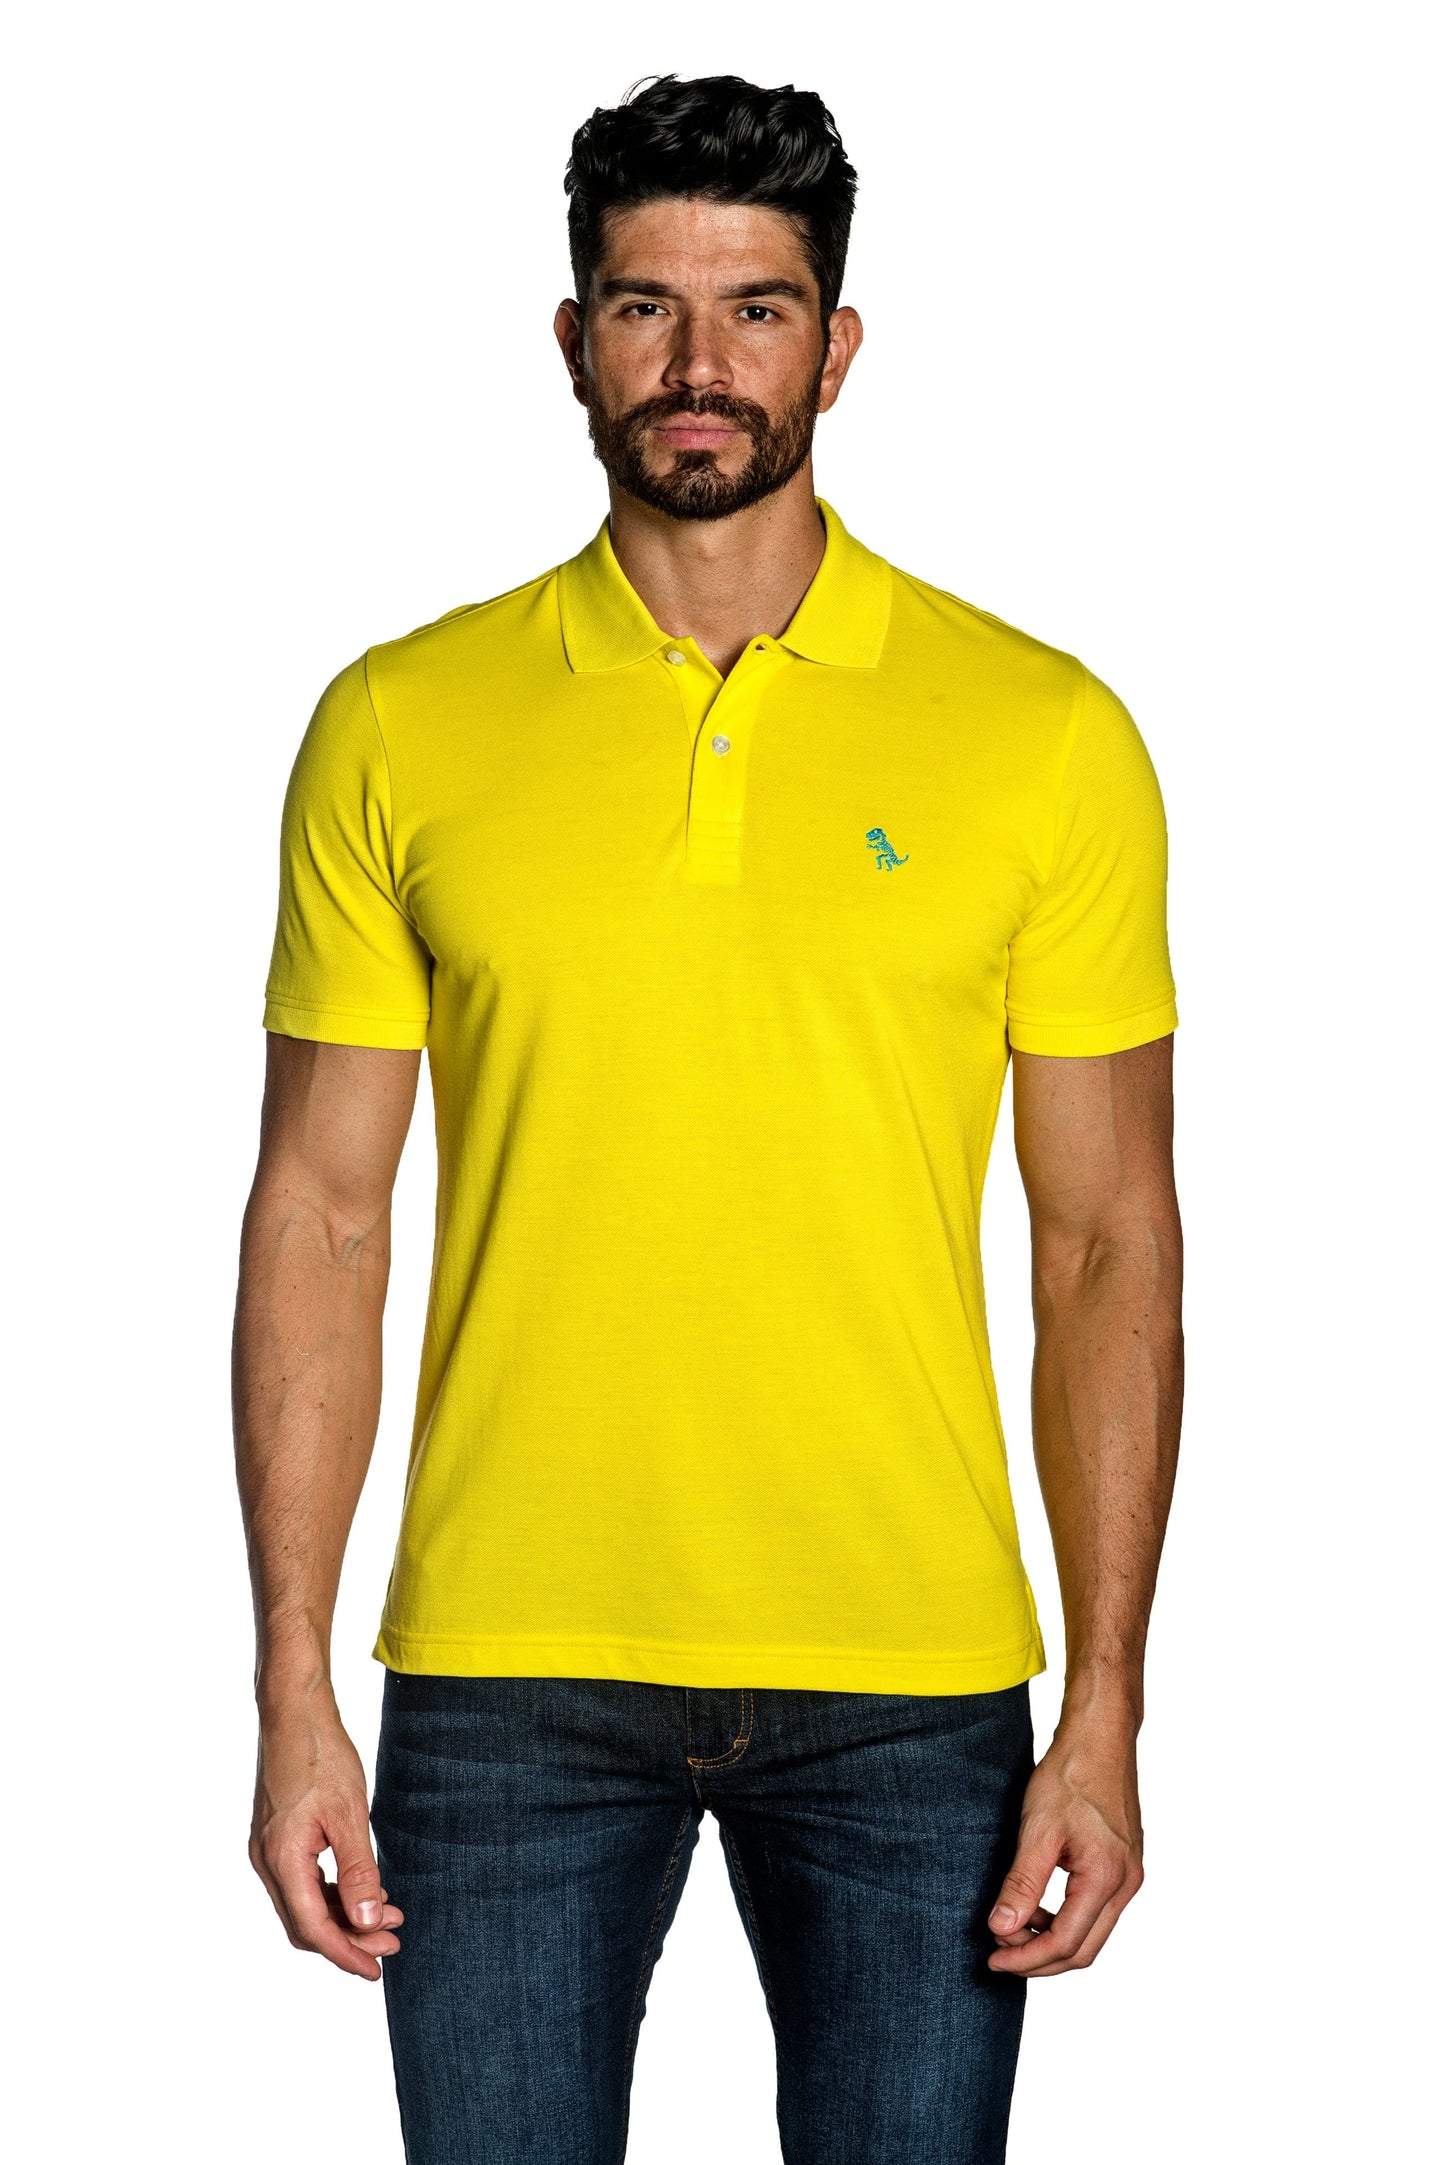 Yellow Mens Polo With Dinosaur Embroidery P-09.